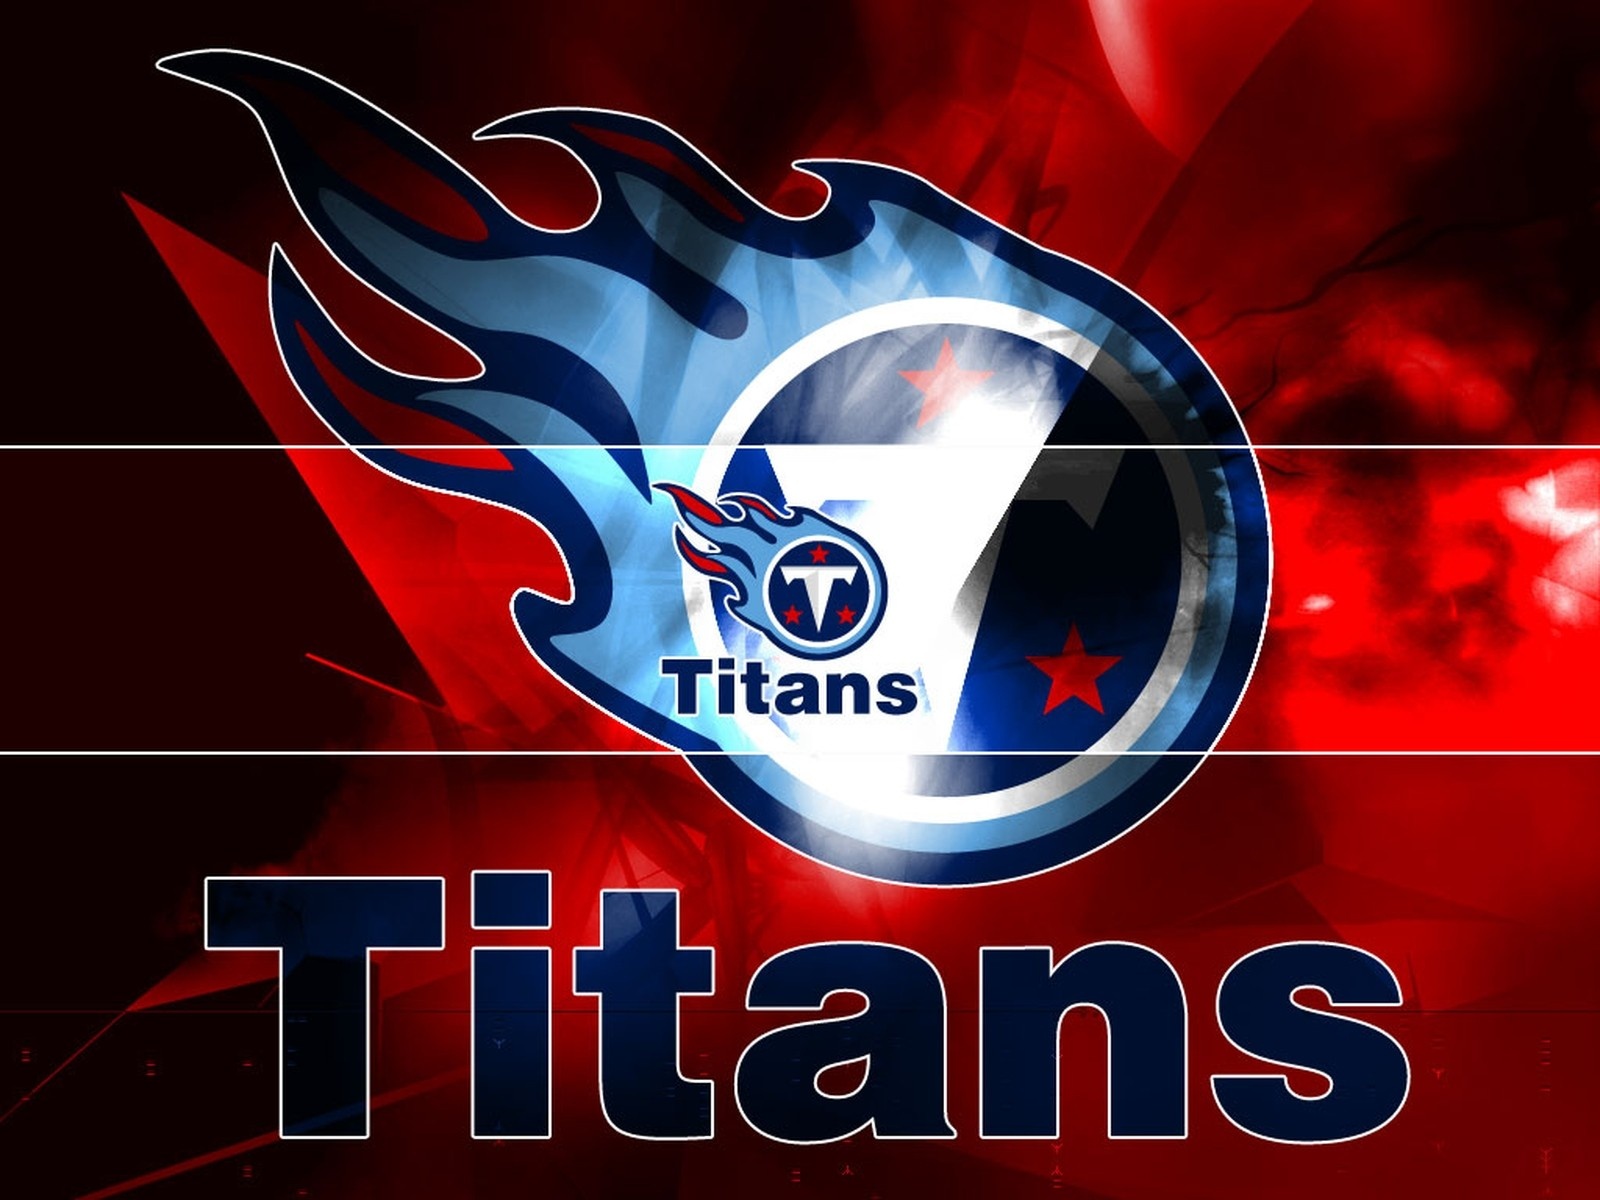 Might be the best Titans wallpaper Ive seen  rTennesseetitans